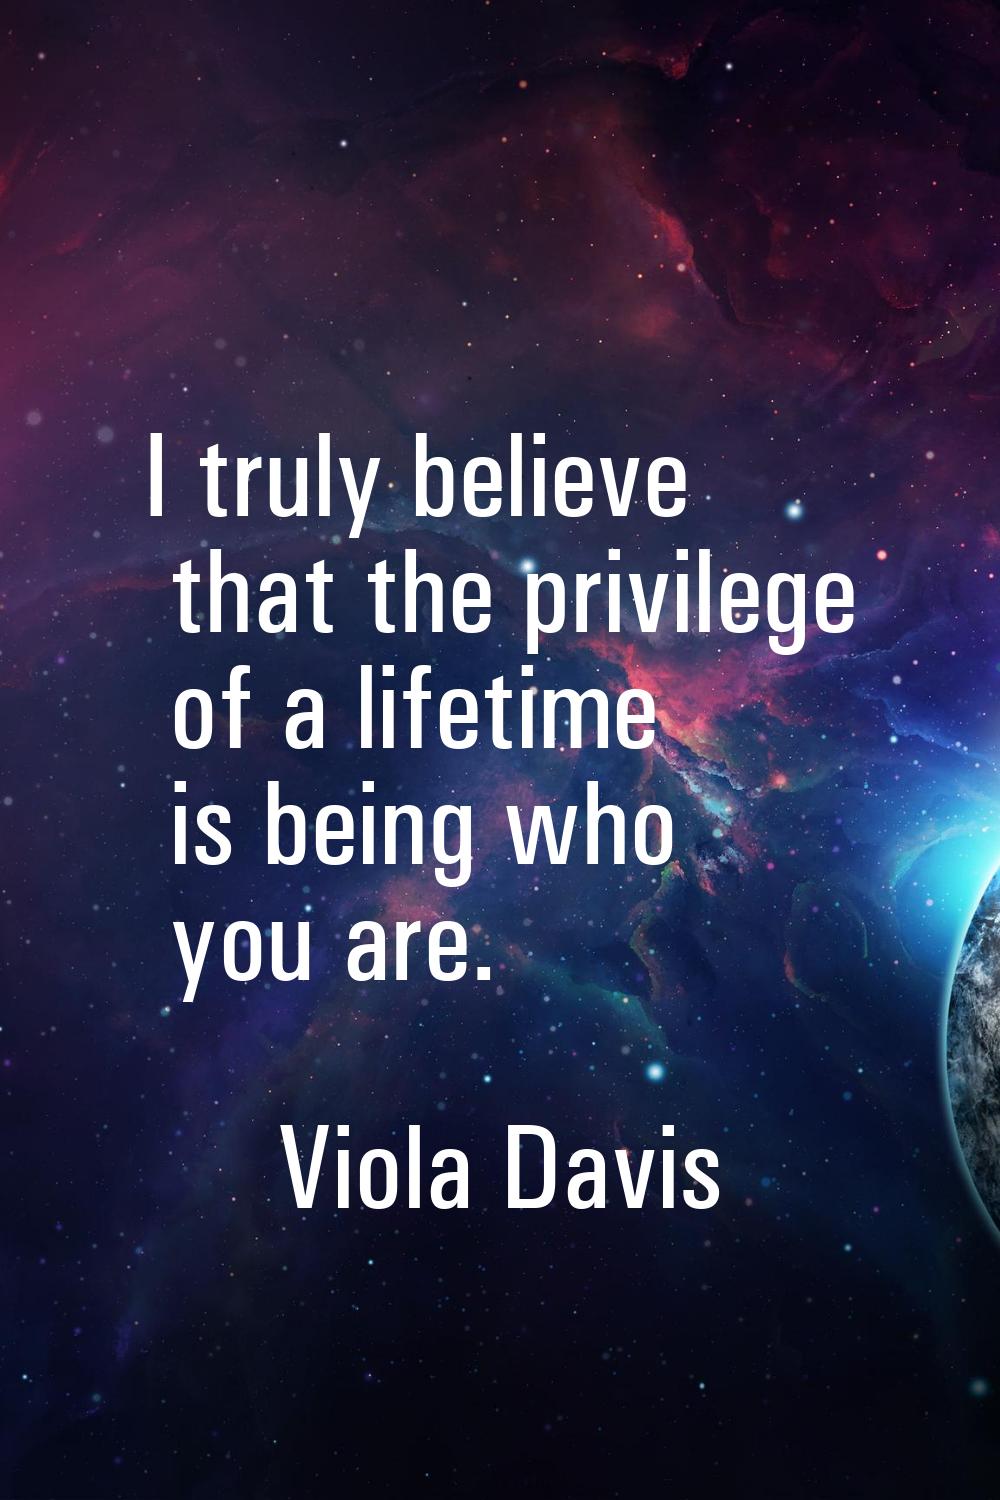 I truly believe that the privilege of a lifetime is being who you are.